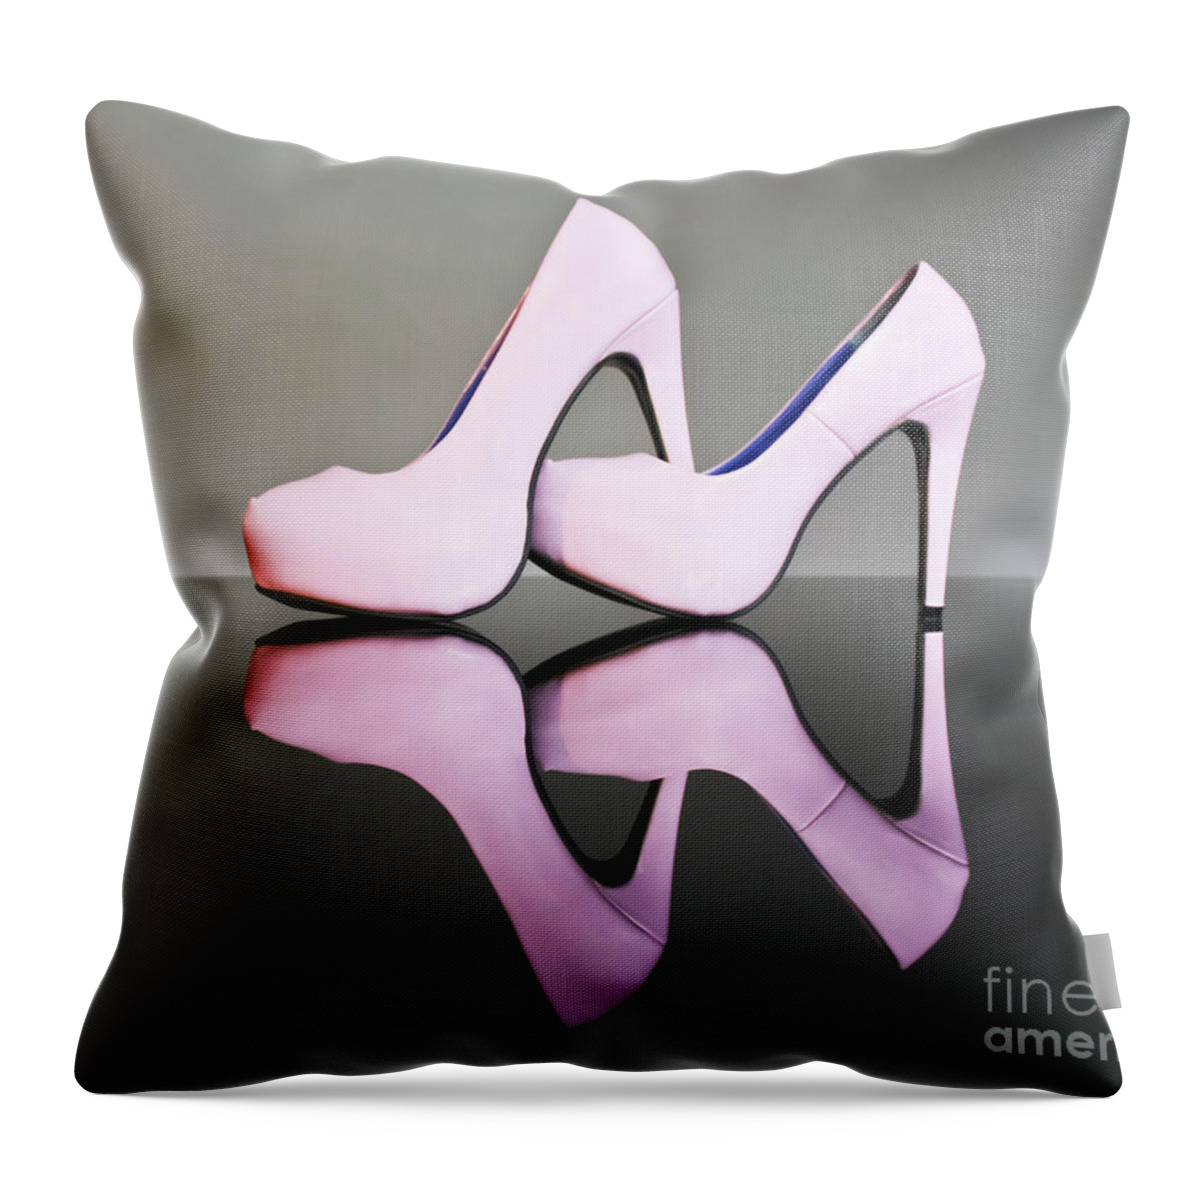 Stiletto Throw Pillow featuring the photograph Pink Stiletto Shoes by Terri Waters